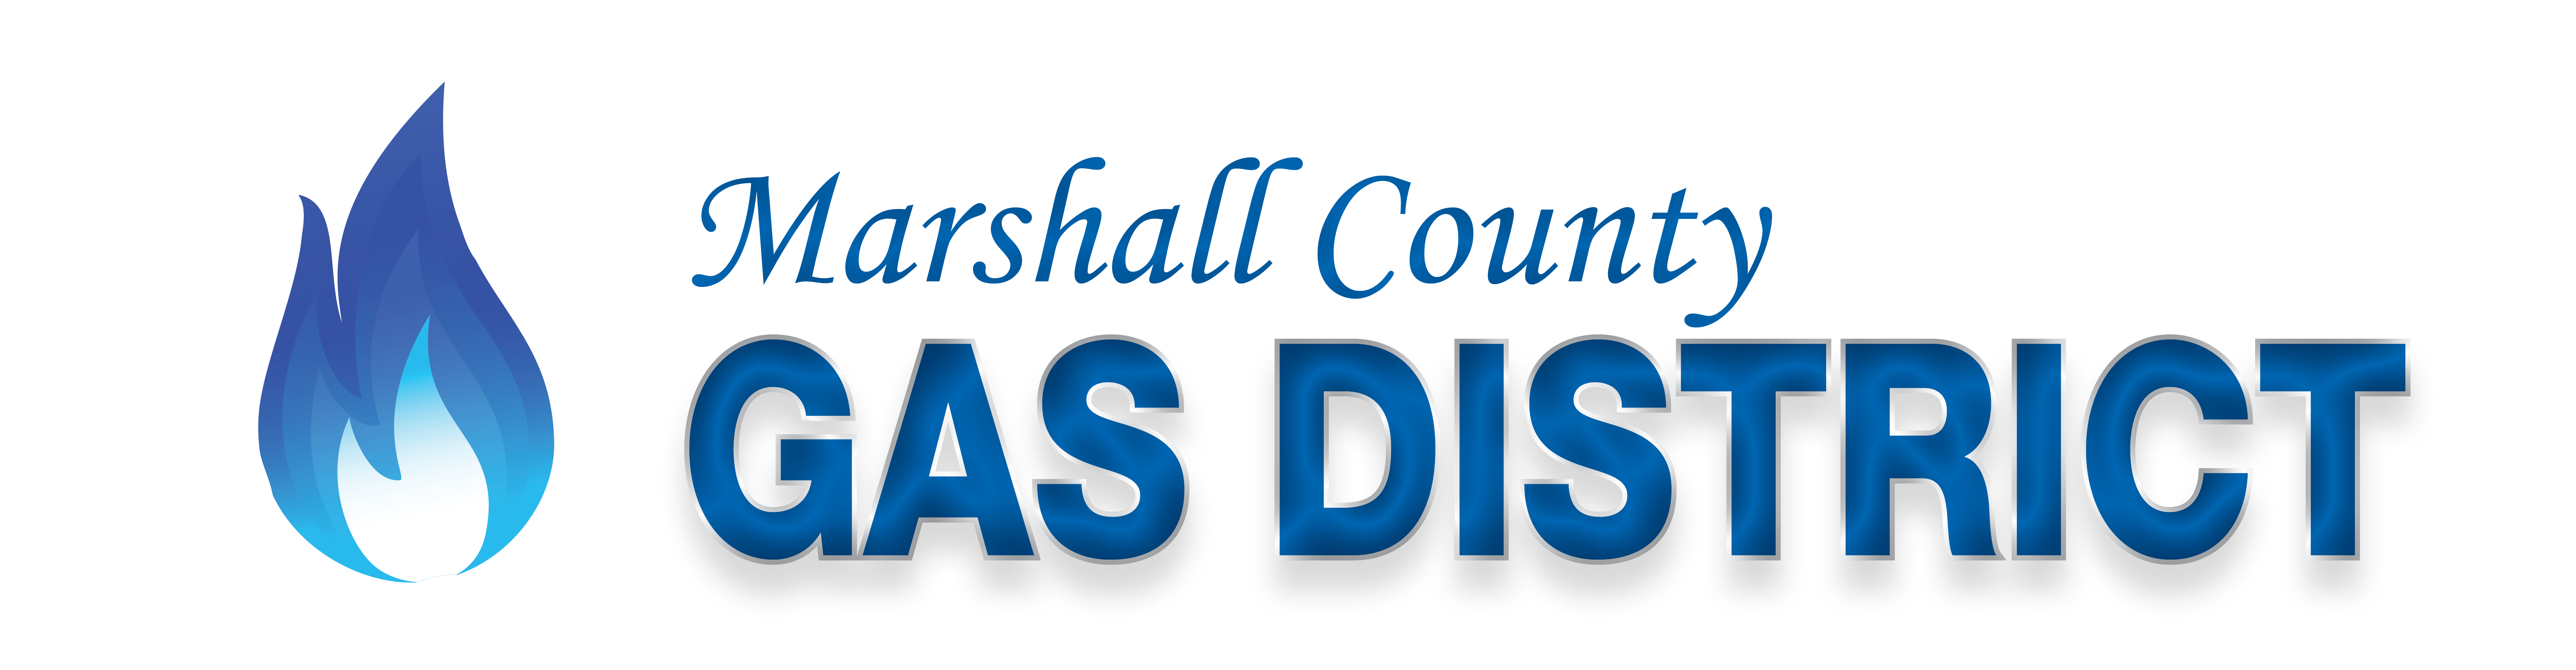 Marshall County Gas District